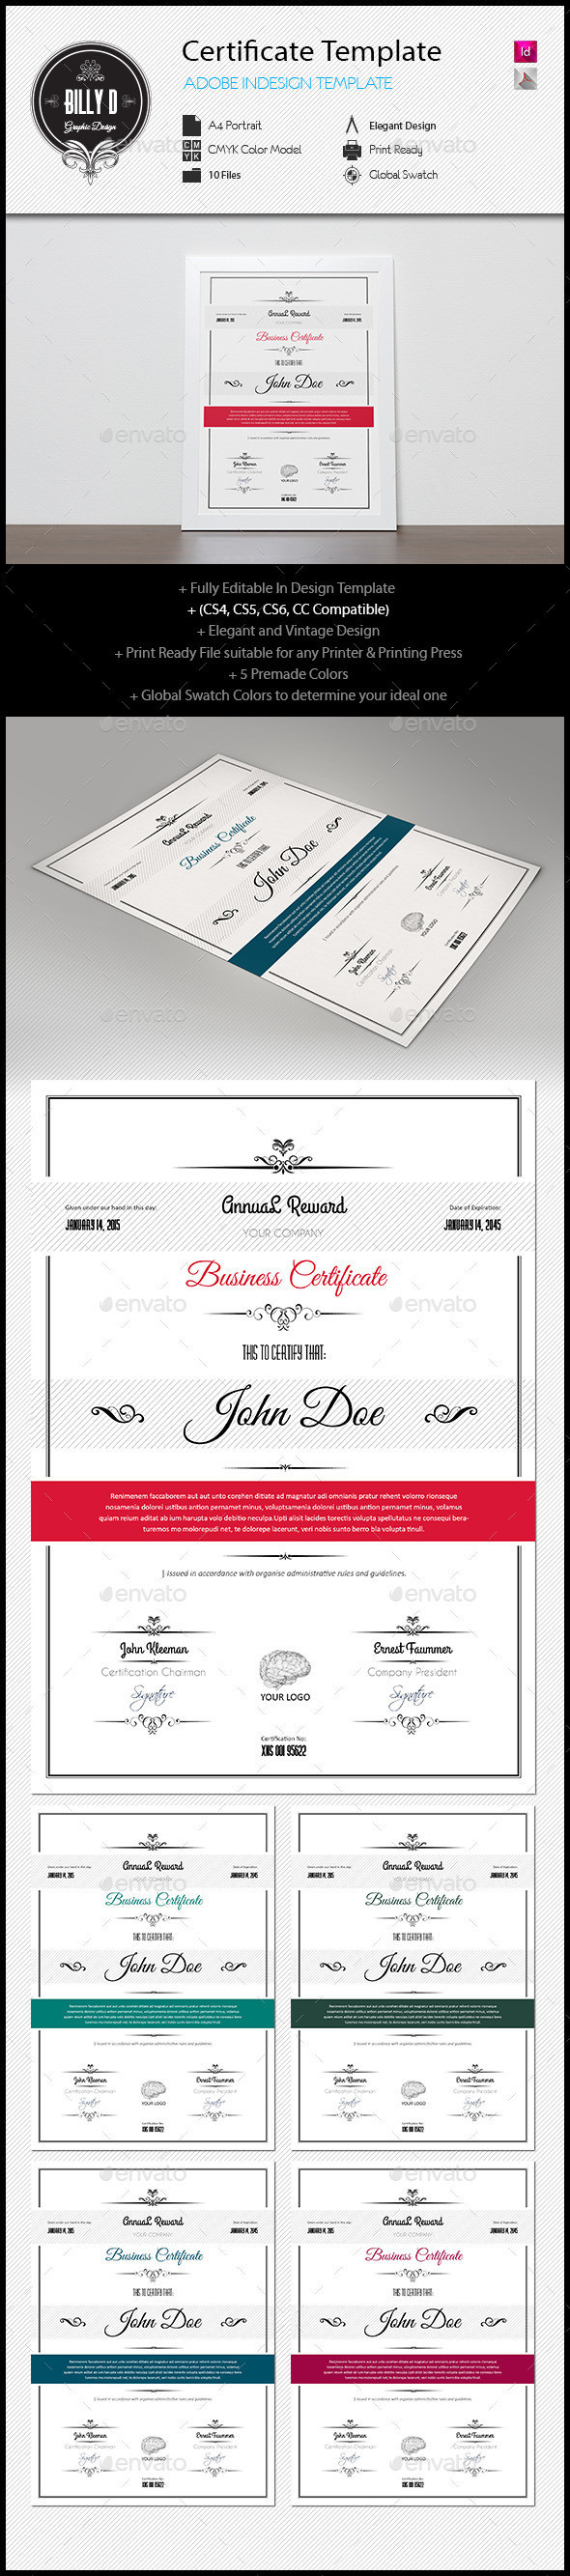 Certificate 20template 20preview 20image 20590x